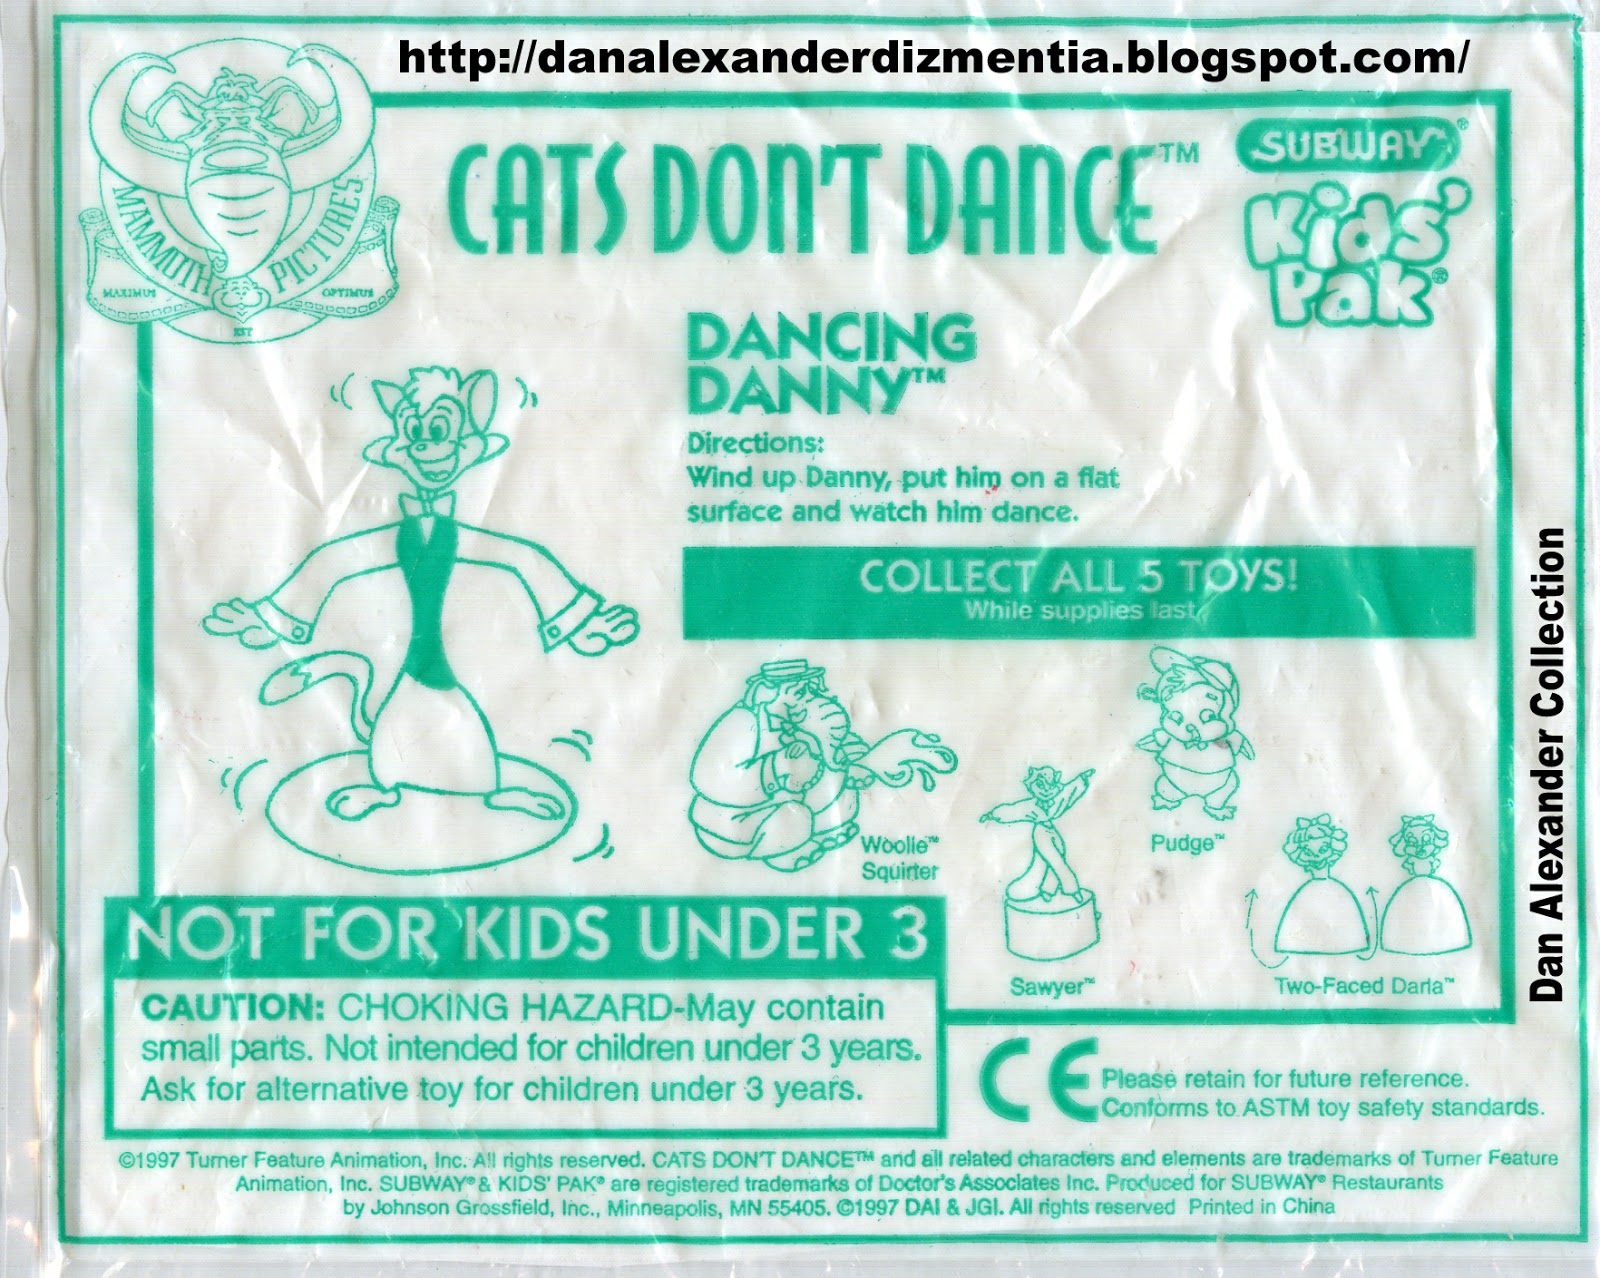 CATS DON'T DANCE SUBWAY SAWYER CARTOON MOVIE PARTY CAKE TOP MEAL TOY GIFT IDEA 